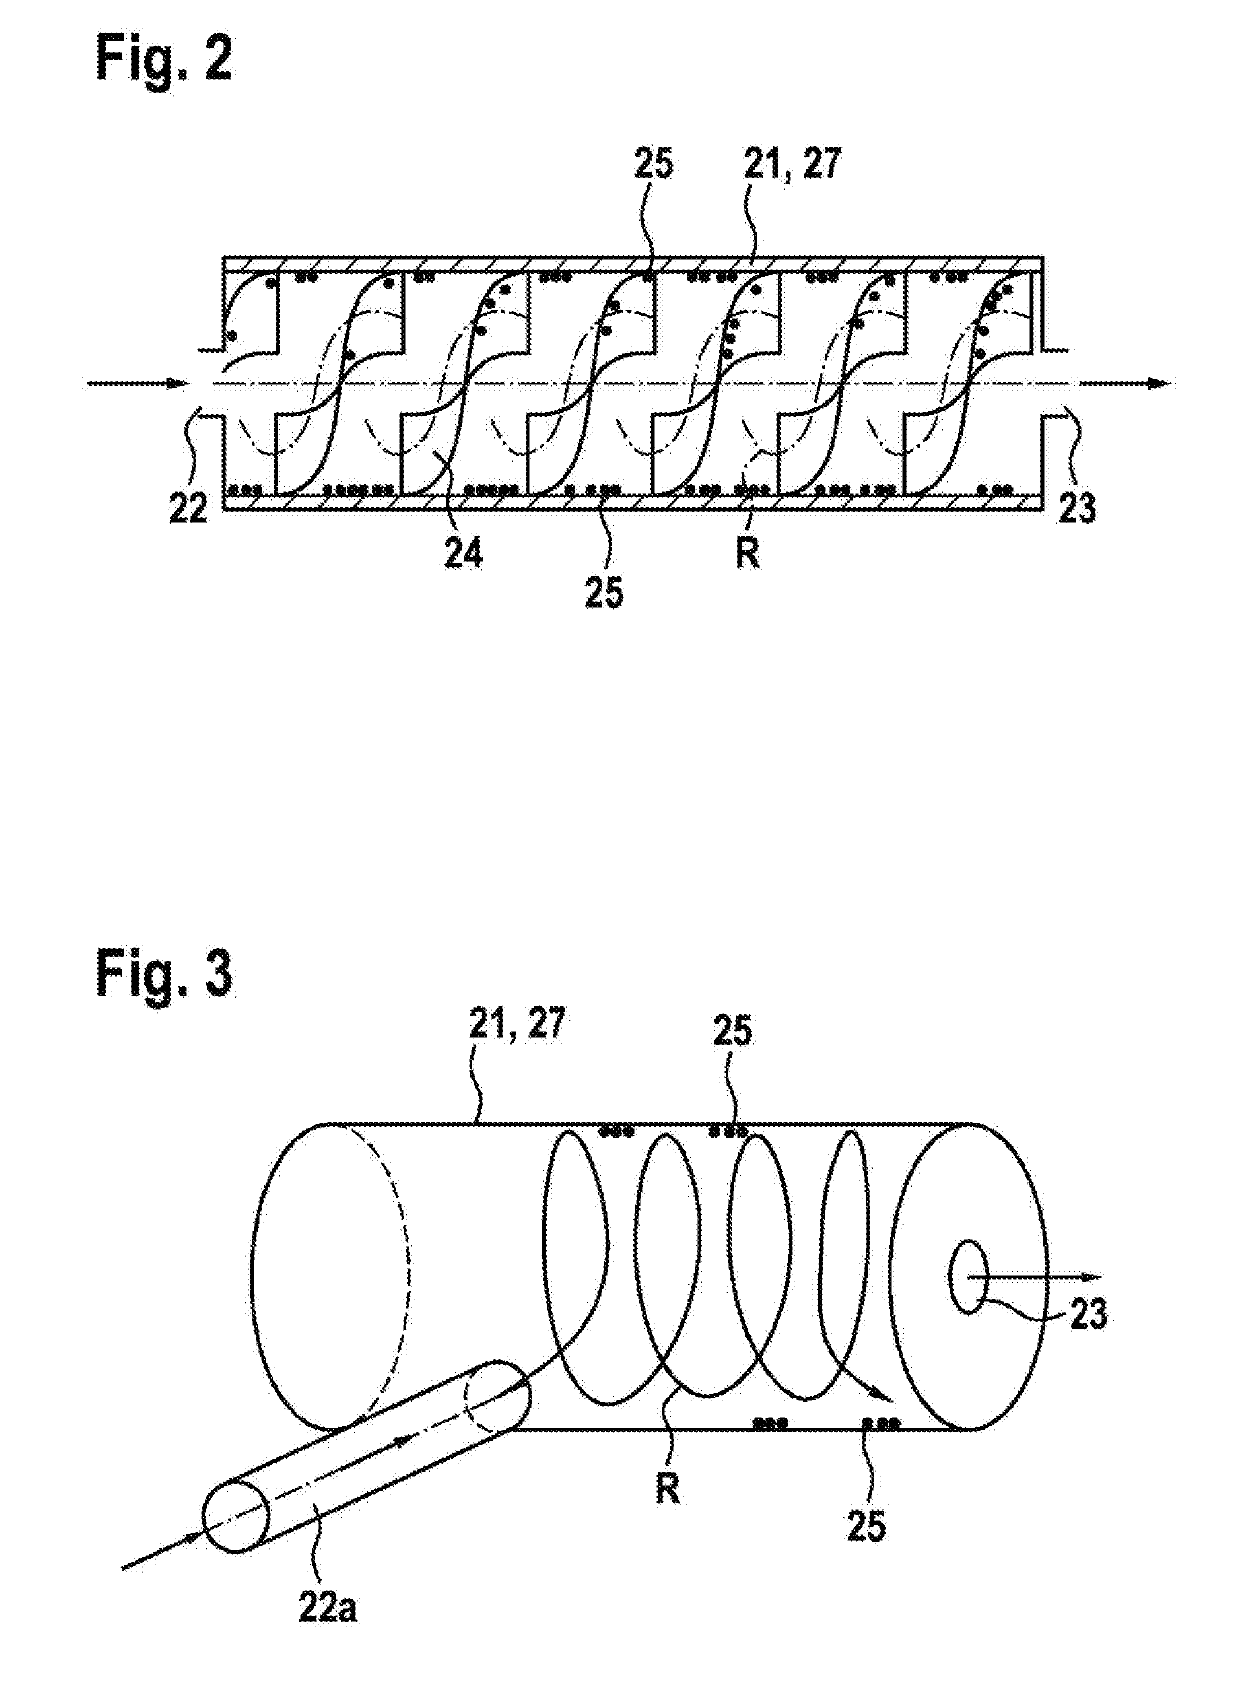 Exhaust heat recovery system having a working fluid circuit and method for operating such an exhaust heat recovery system